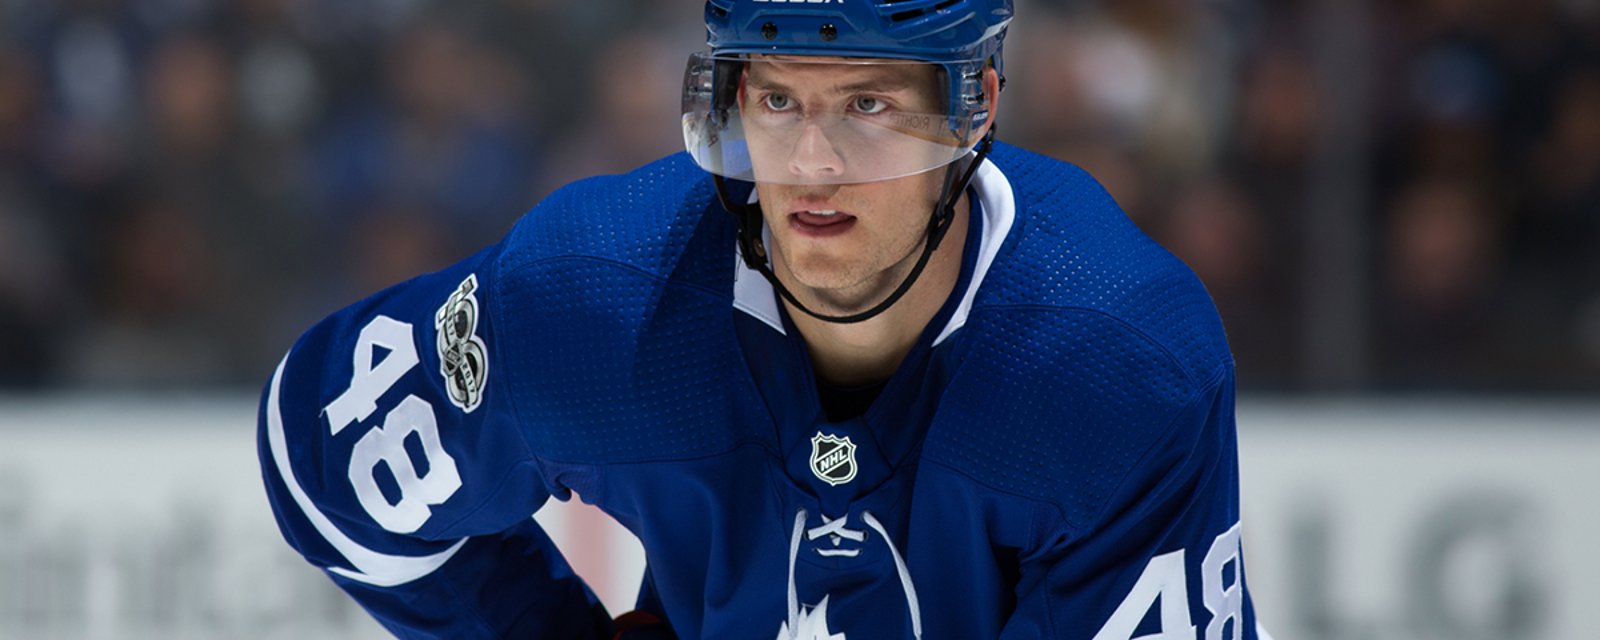 Breaking: Leafs sign blueliner Rosen to contract extension